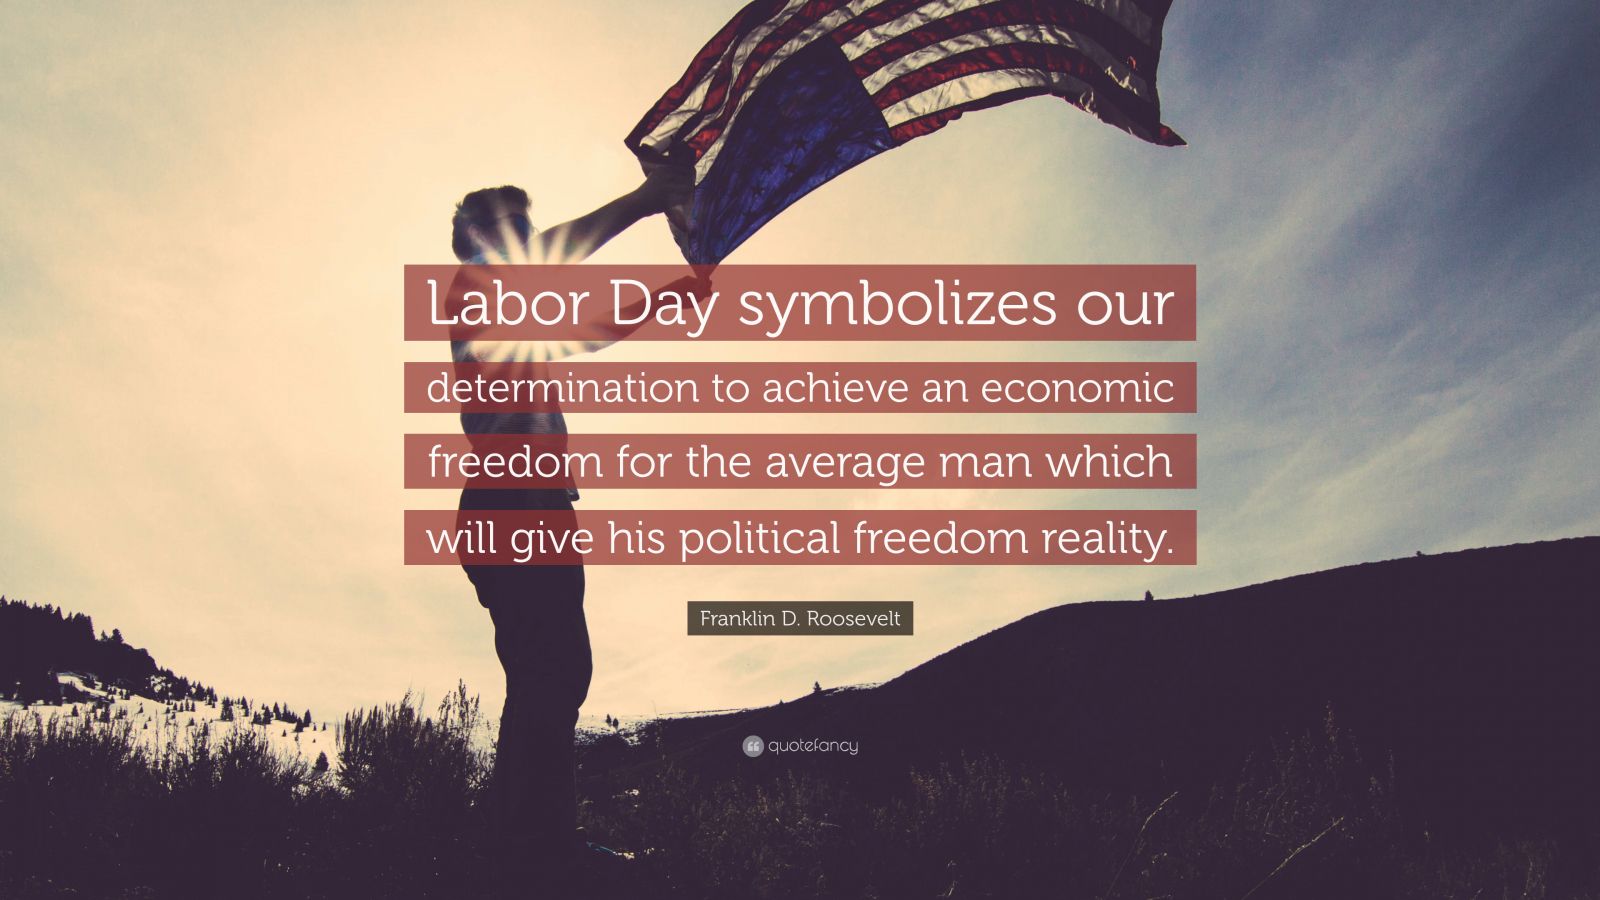 Franklin D. Roosevelt Quote: “Labor Day symbolizes our determination to